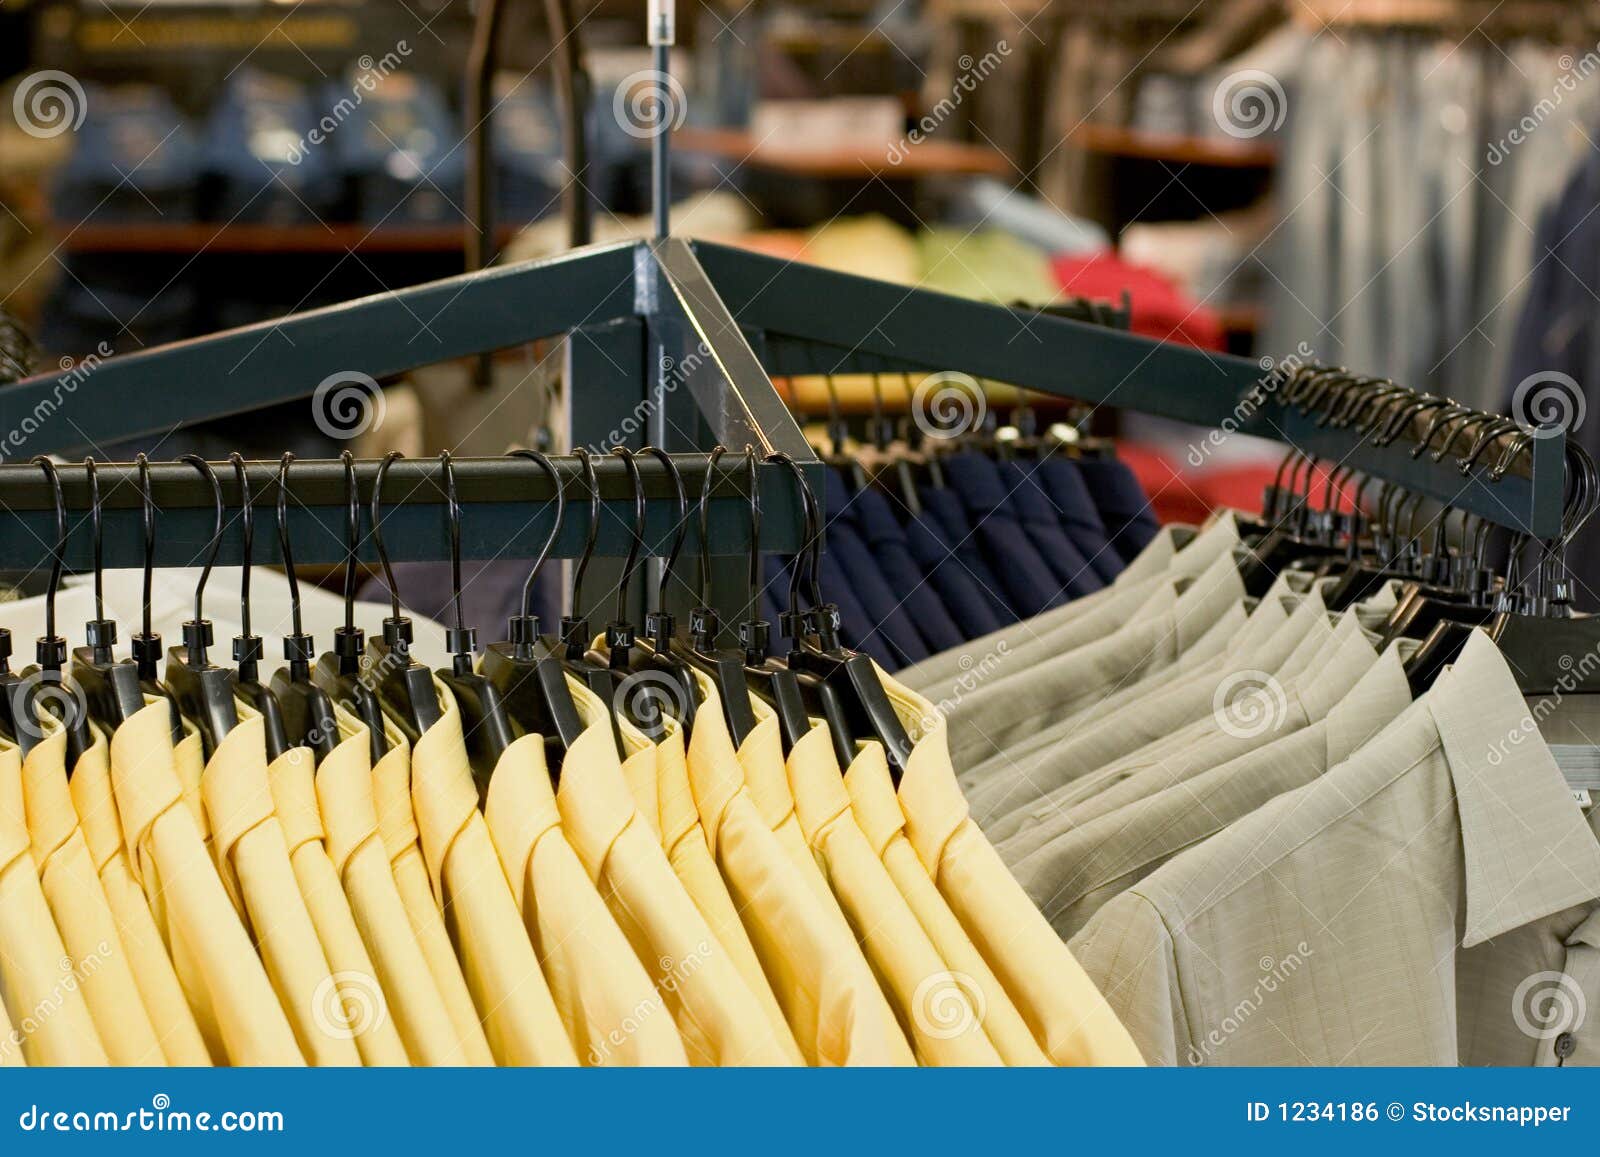 Shirts for sale stock photo. Image of wear, consumer, mens - 1234186